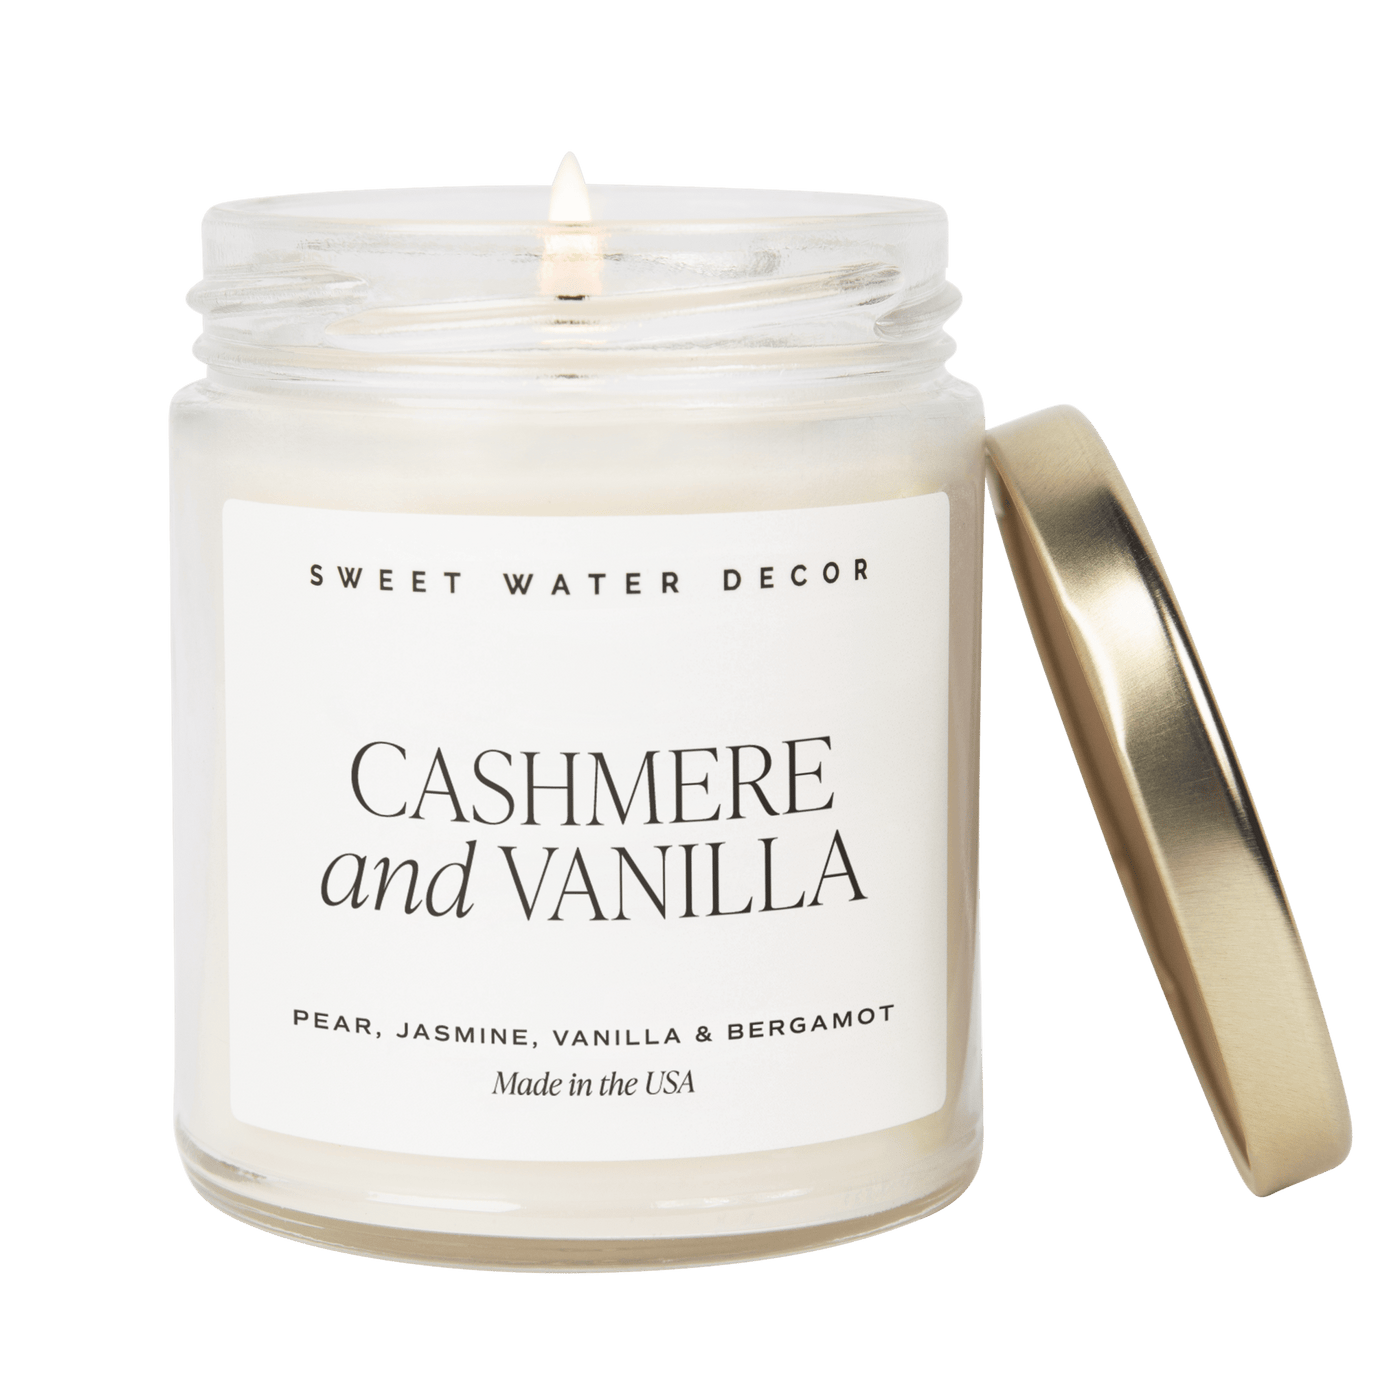 Cashmere and Vanilla Soy Candle - Clear Jar - 9 oz - Sweet Water Decor - Candles